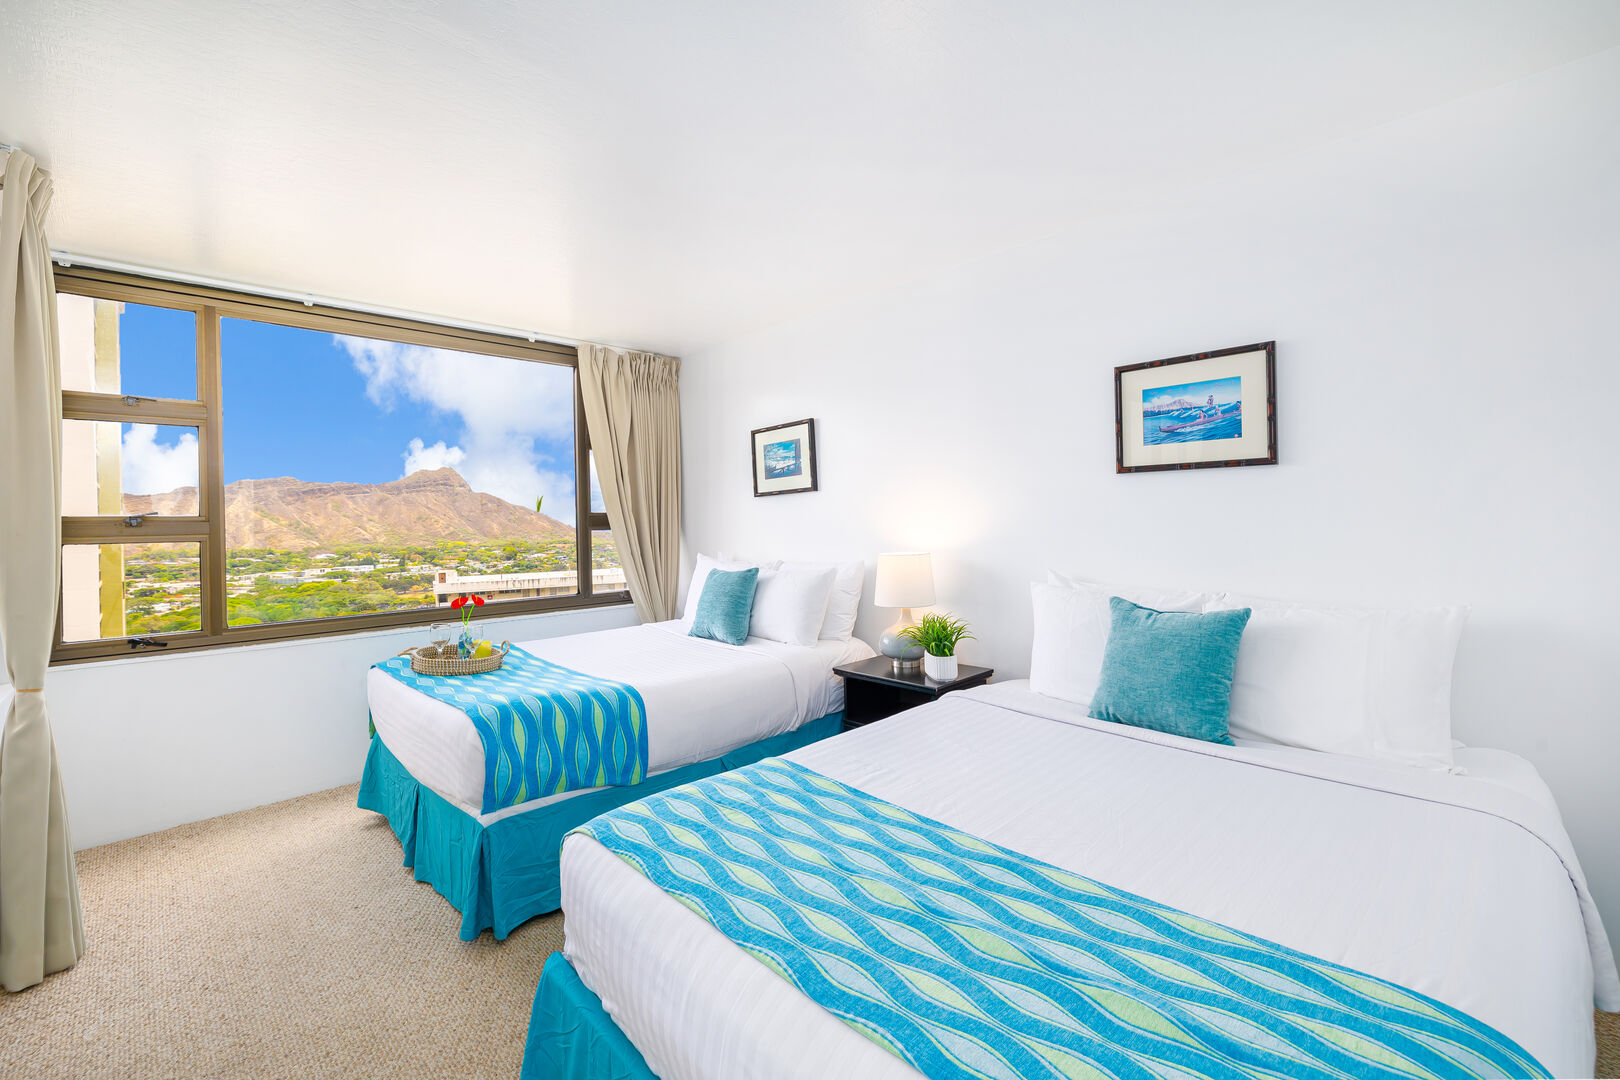 Have a good rest with this stunning Diamond Head view in your bedroom that has 1 queen-size and 1 full-size bed.